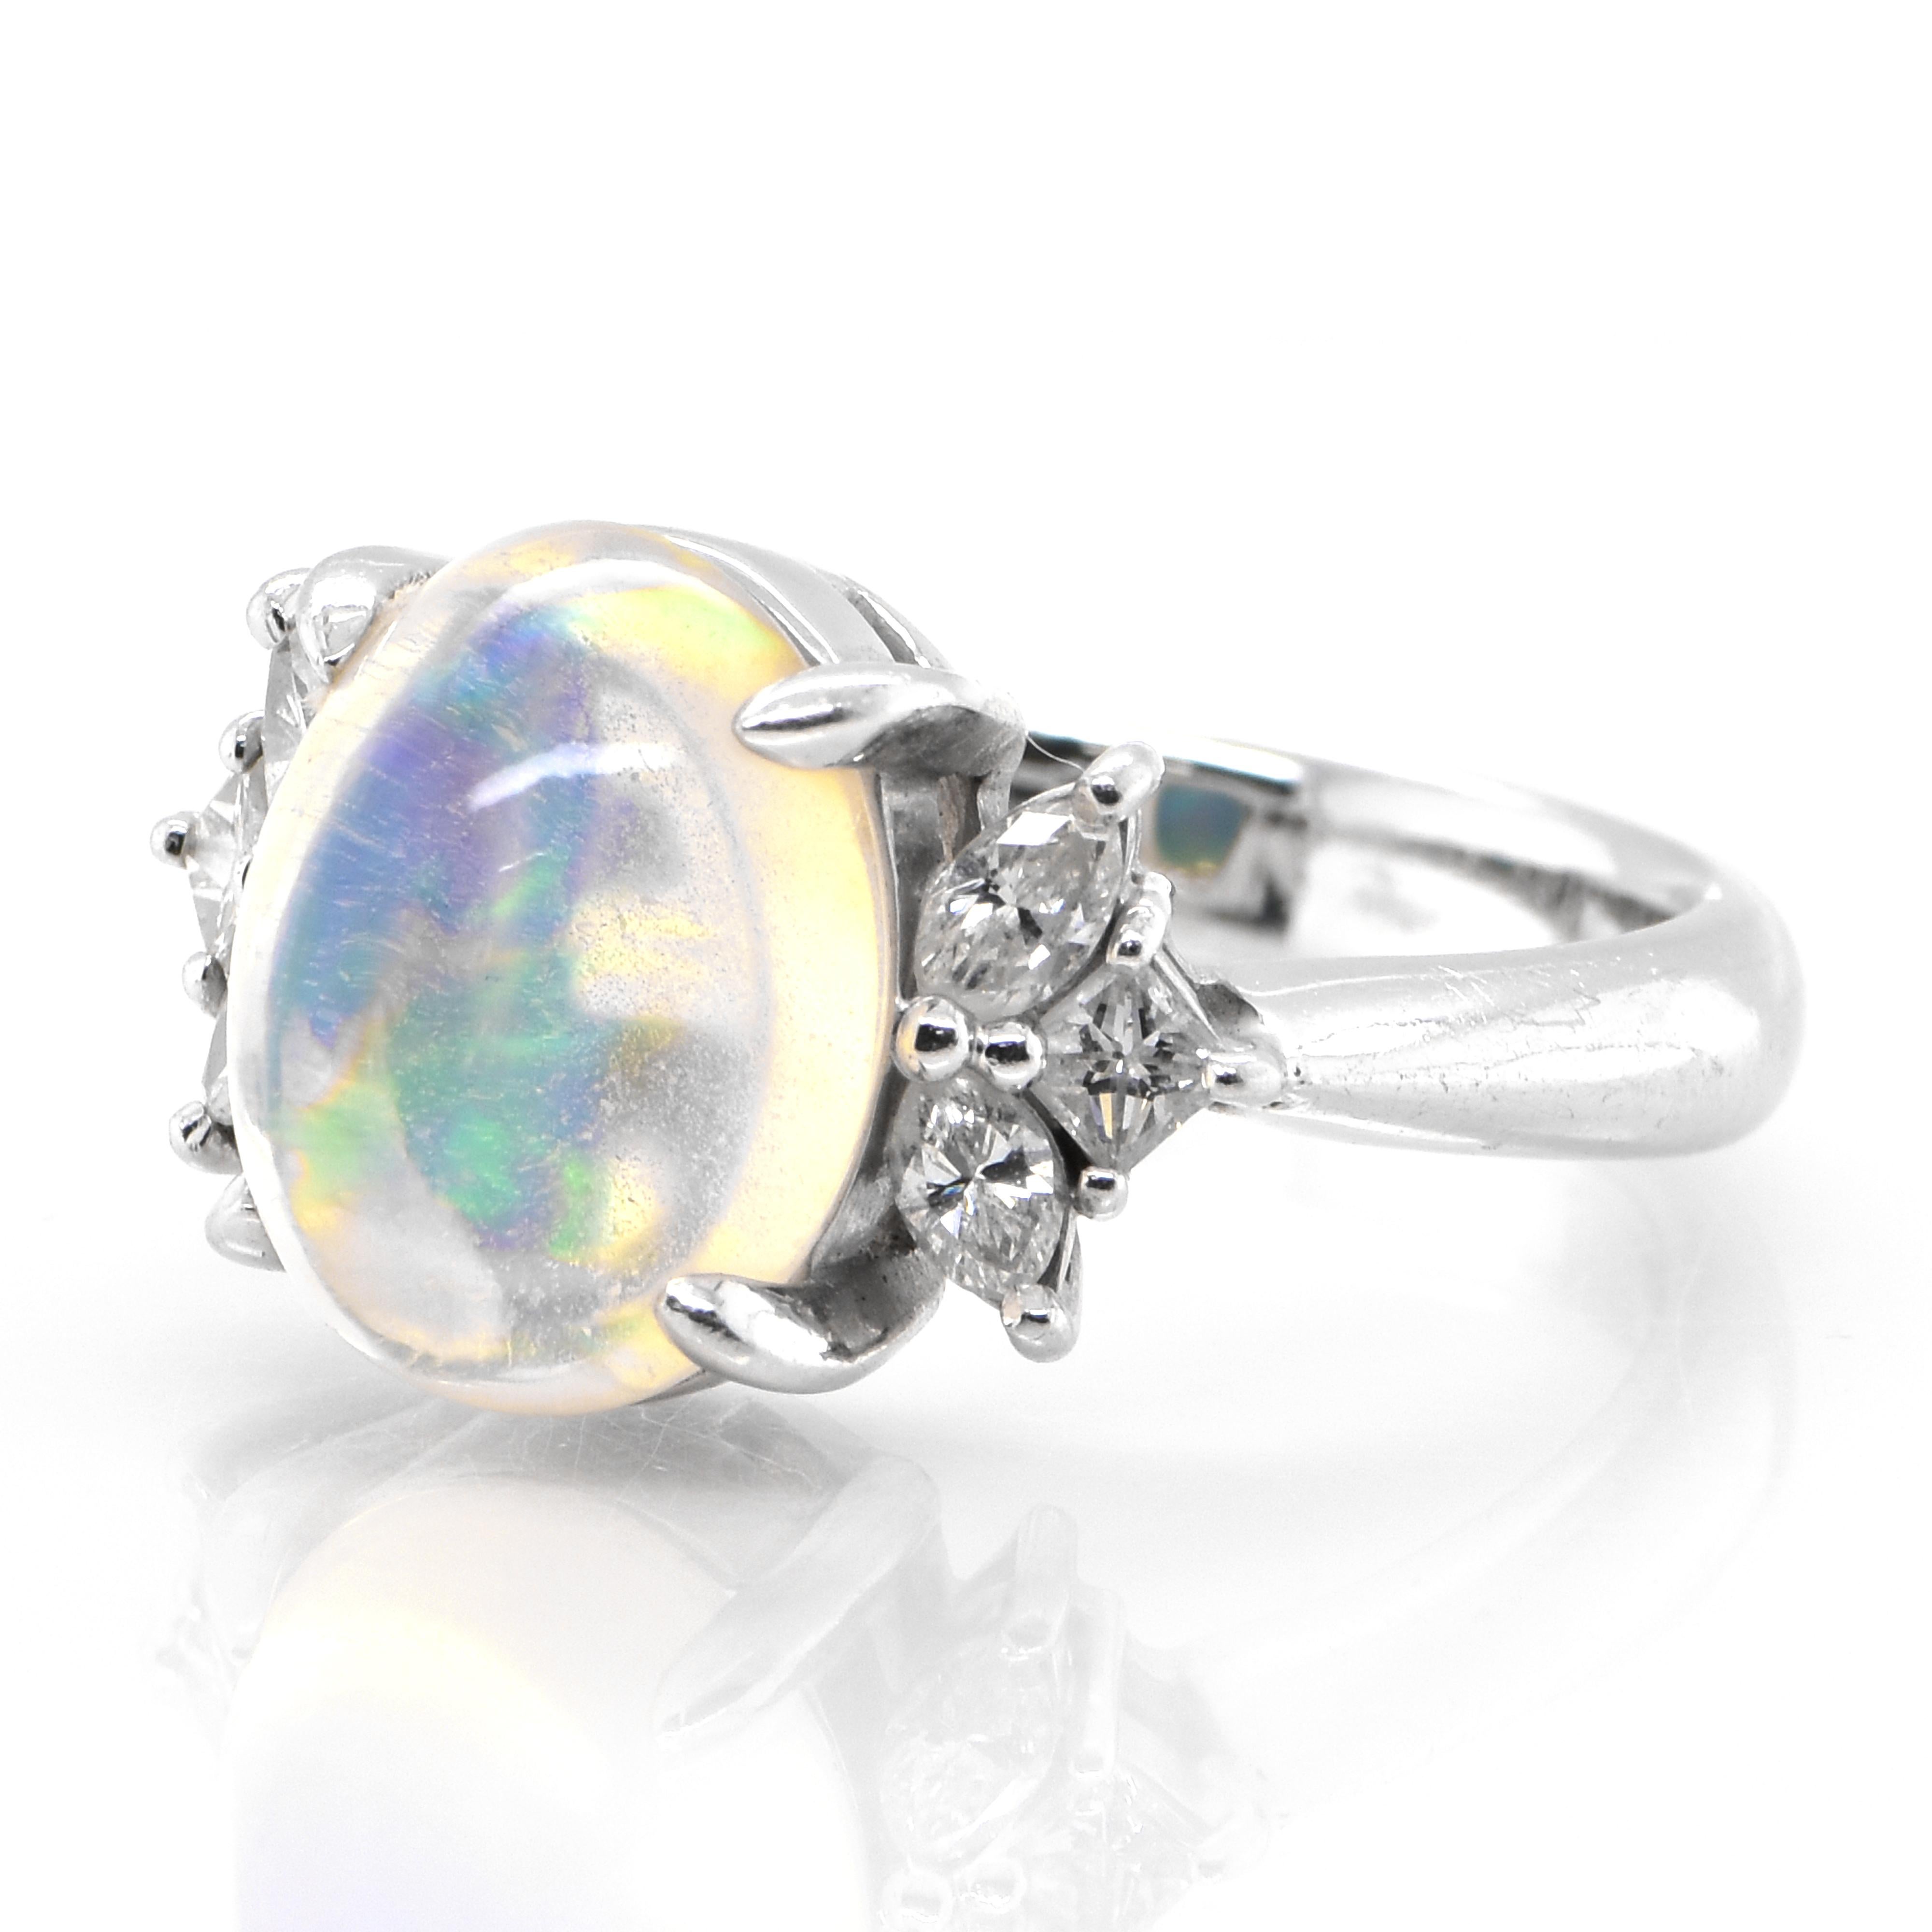 A beautiful ring featuring a 4.17 Carat Natural Water Opal and 0.45 Carats of Diamond Accents set in Platinum. Opals are known for exhibiting flashes of rainbow colors known as 